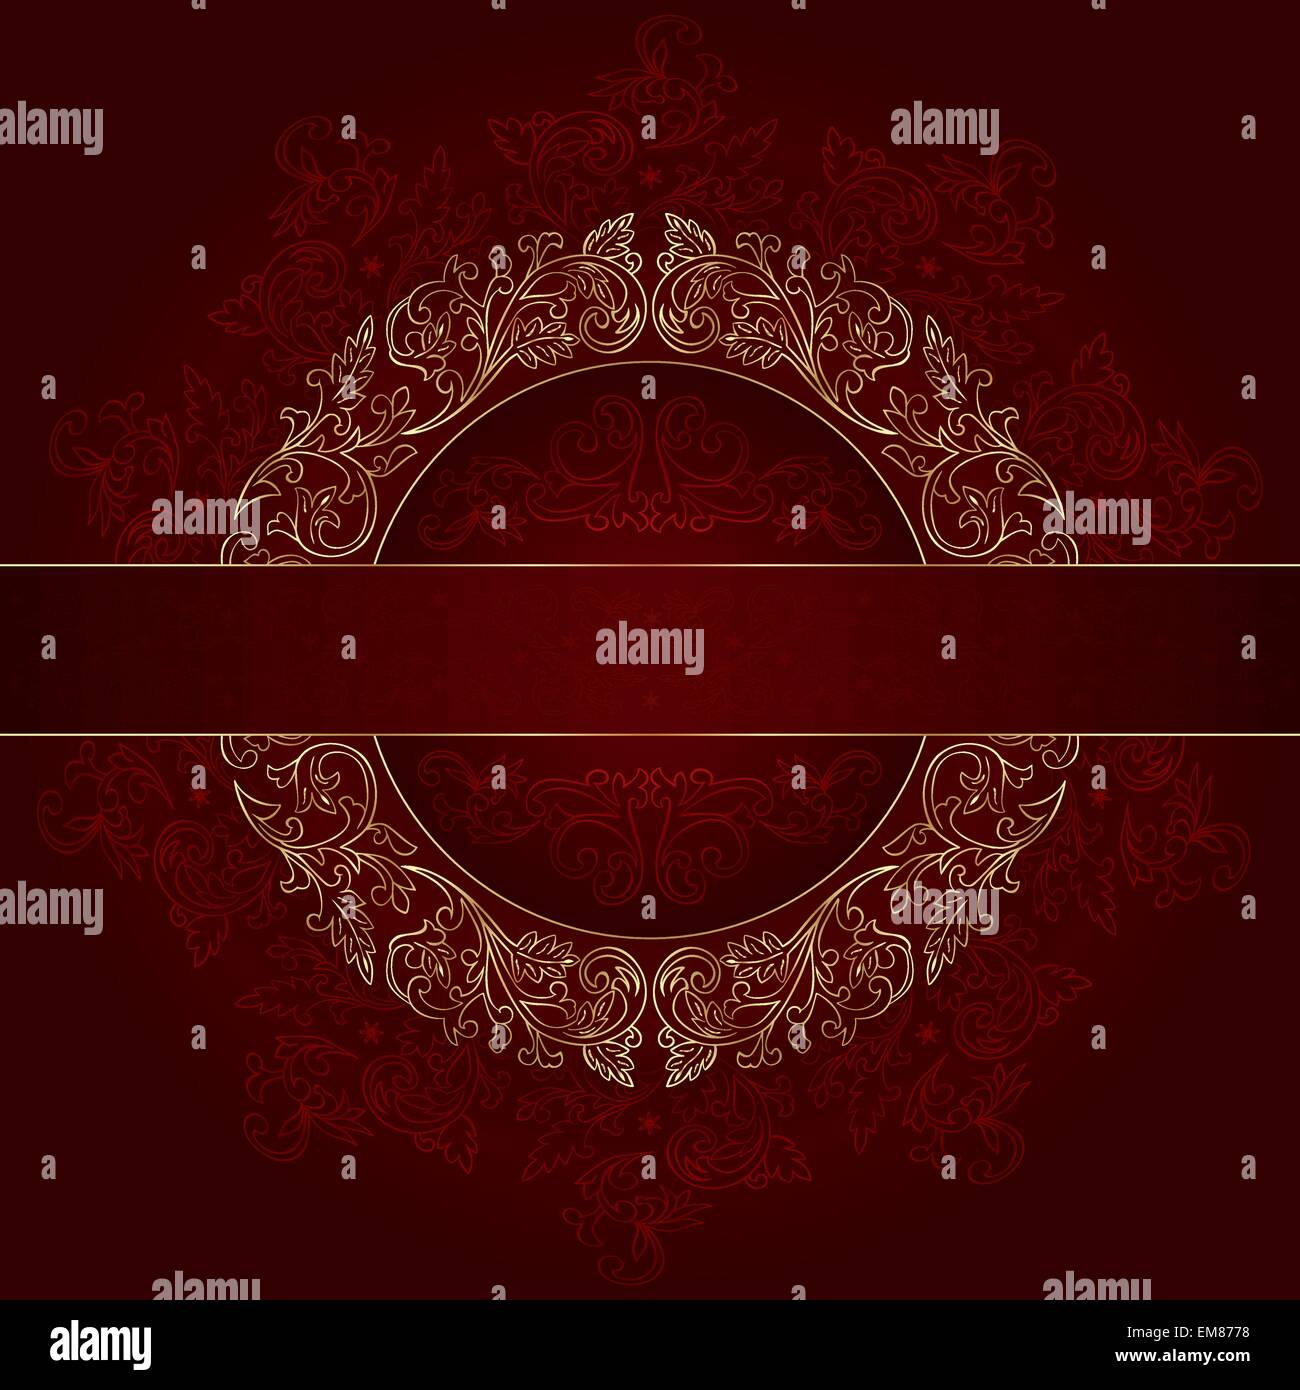 Floral gold frame with vintage patterns on red background Stock Vector